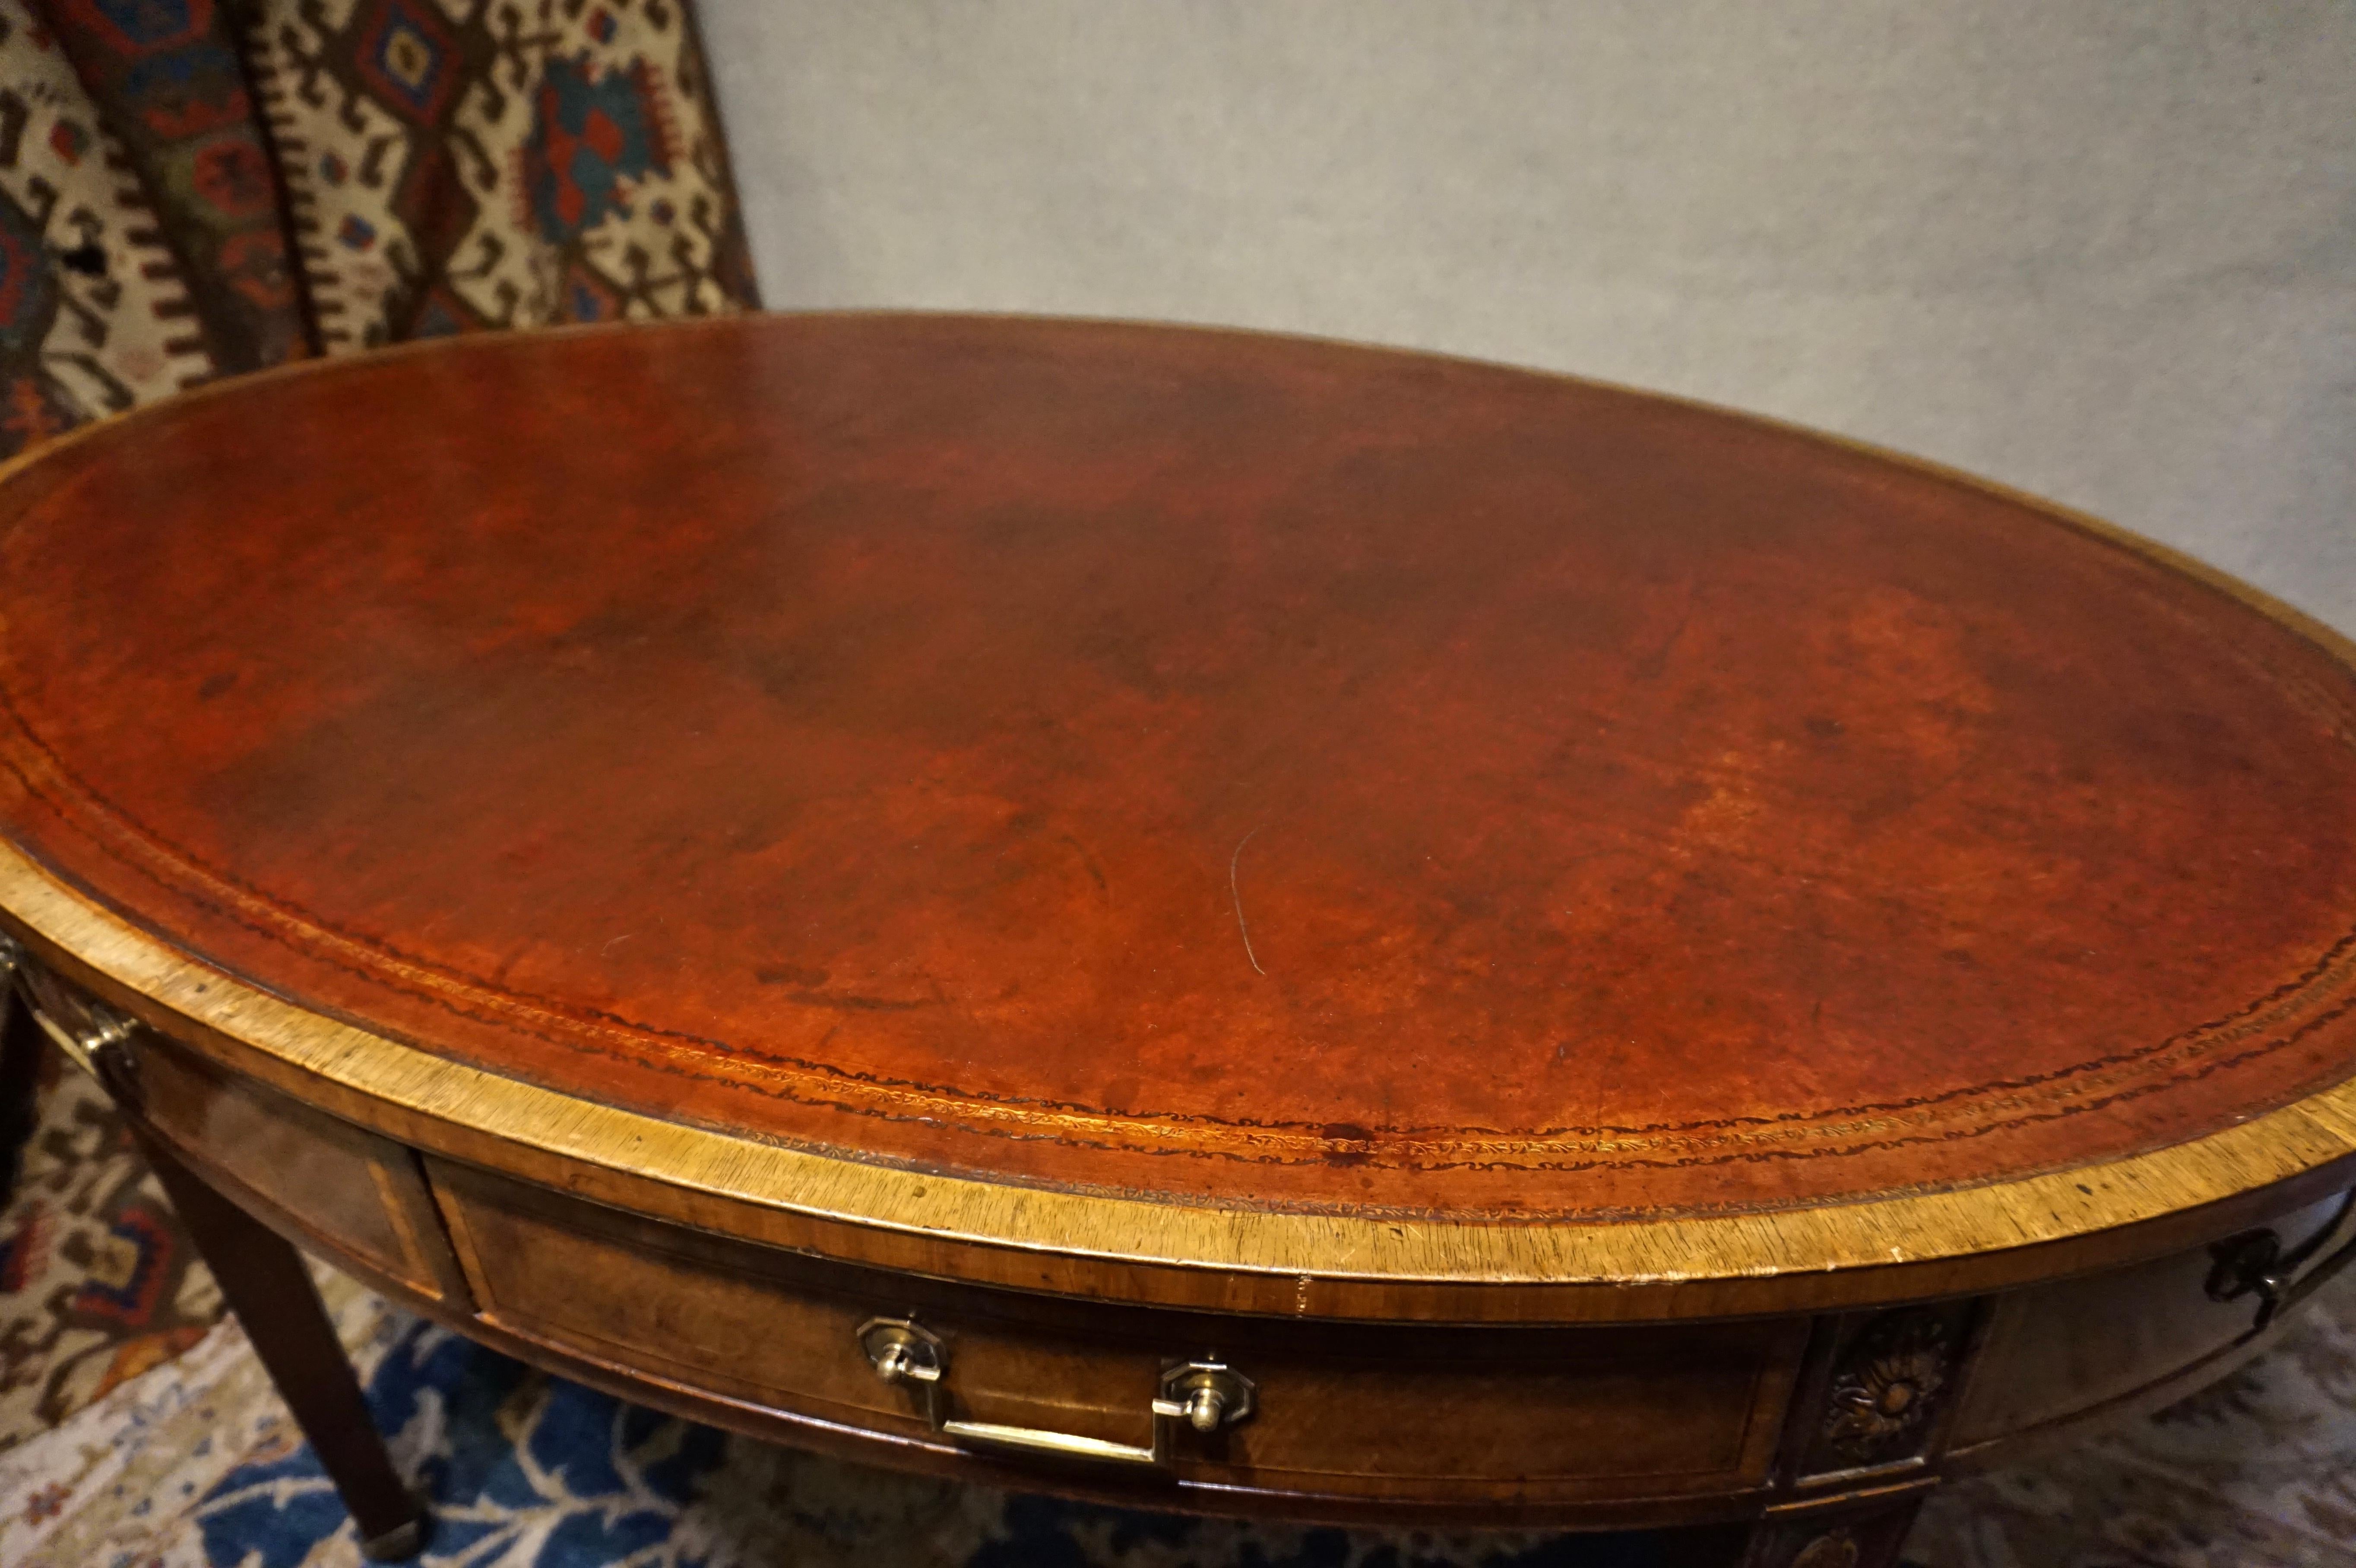 English Regency Revival Mahogany Oval Table with Gilt Leather Top 11